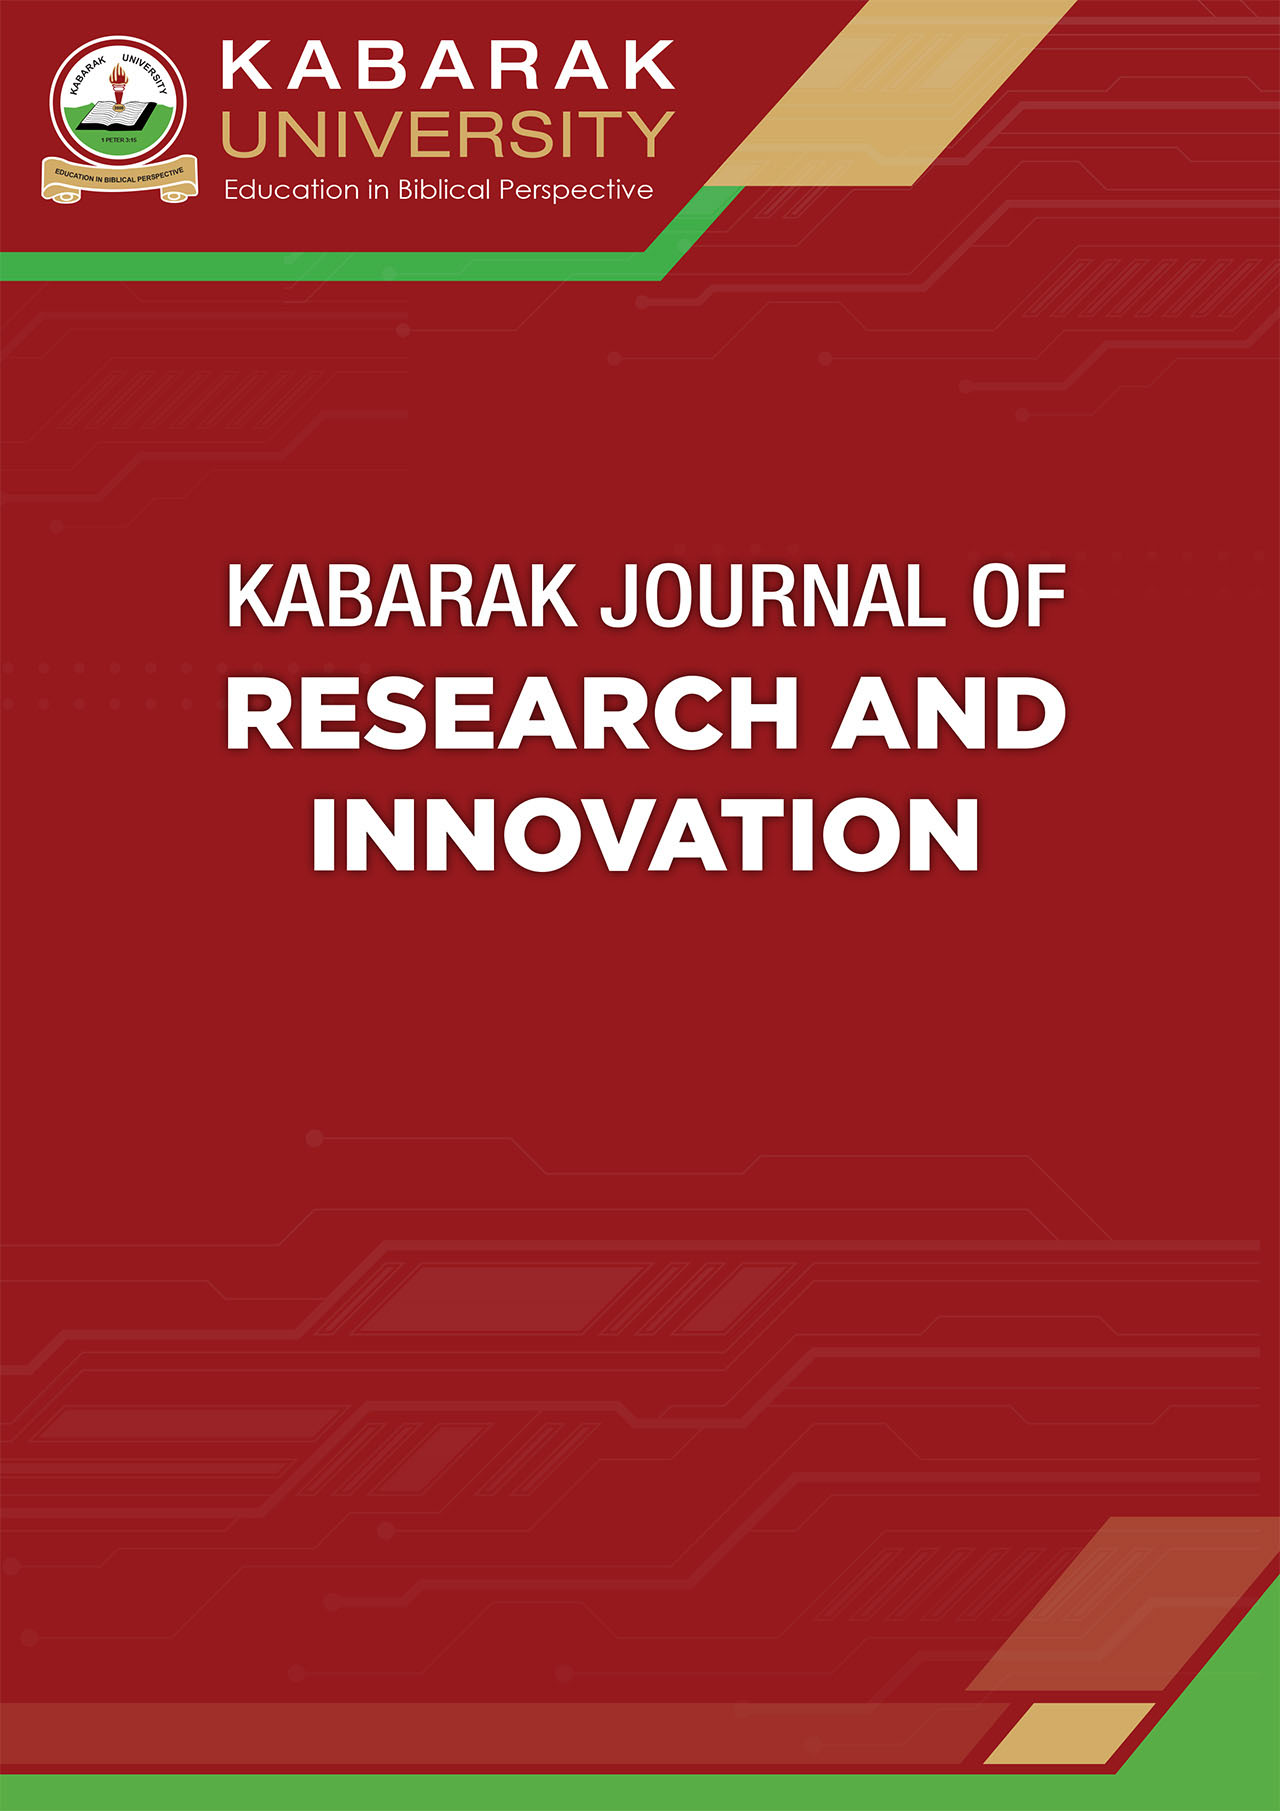 					View Vol. 9 No. 1 (2020): Kabarak Journal of Research and Innovation (KJRI)
				